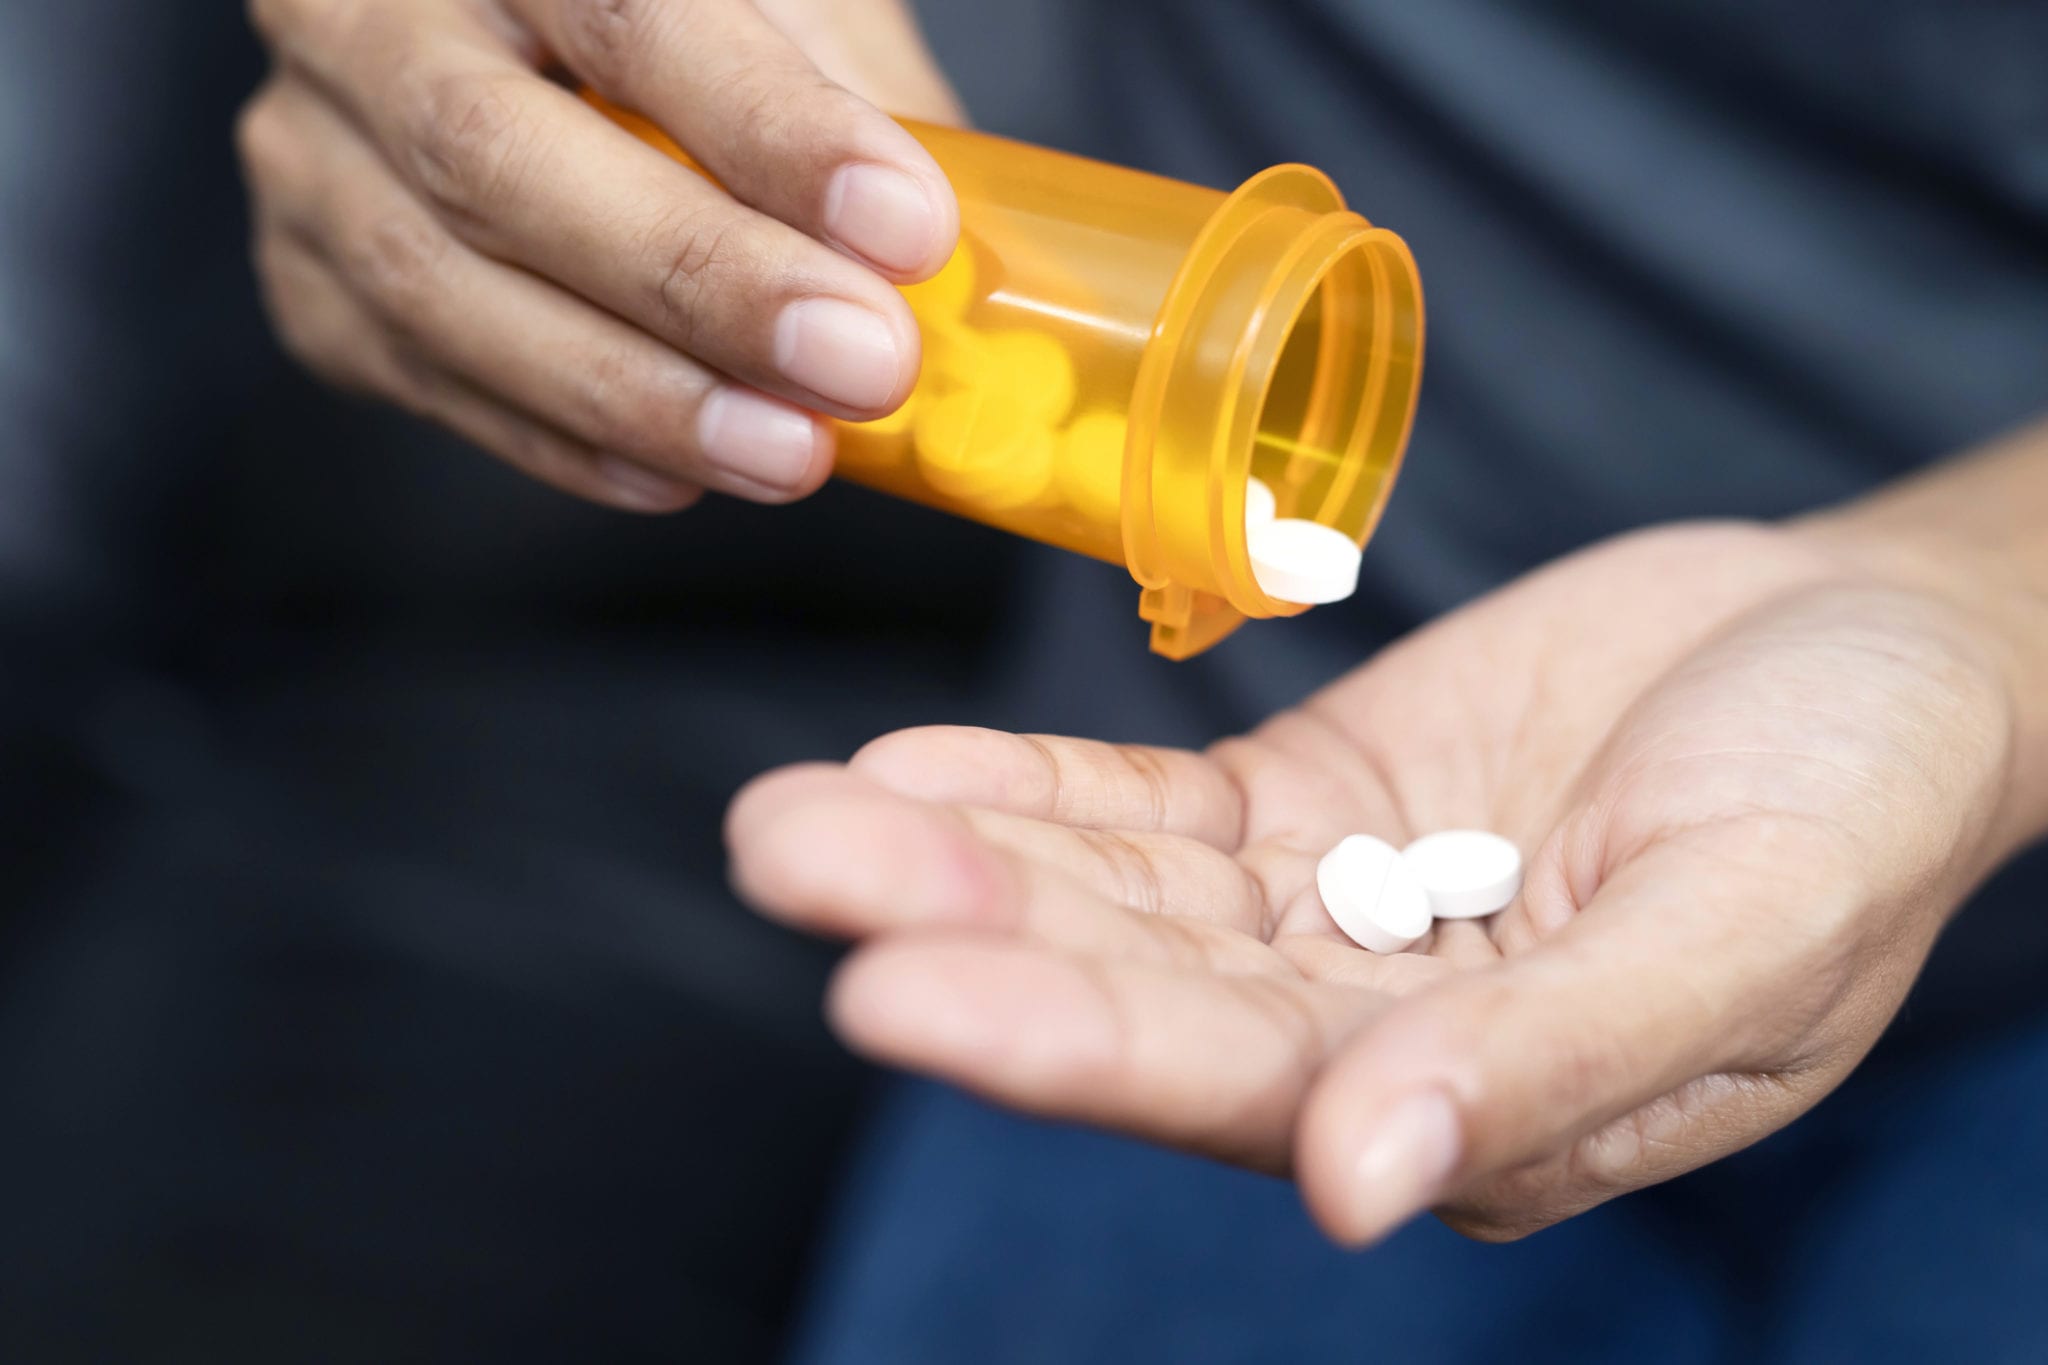 shaking pills from bottle into open hand (safe prescribing)